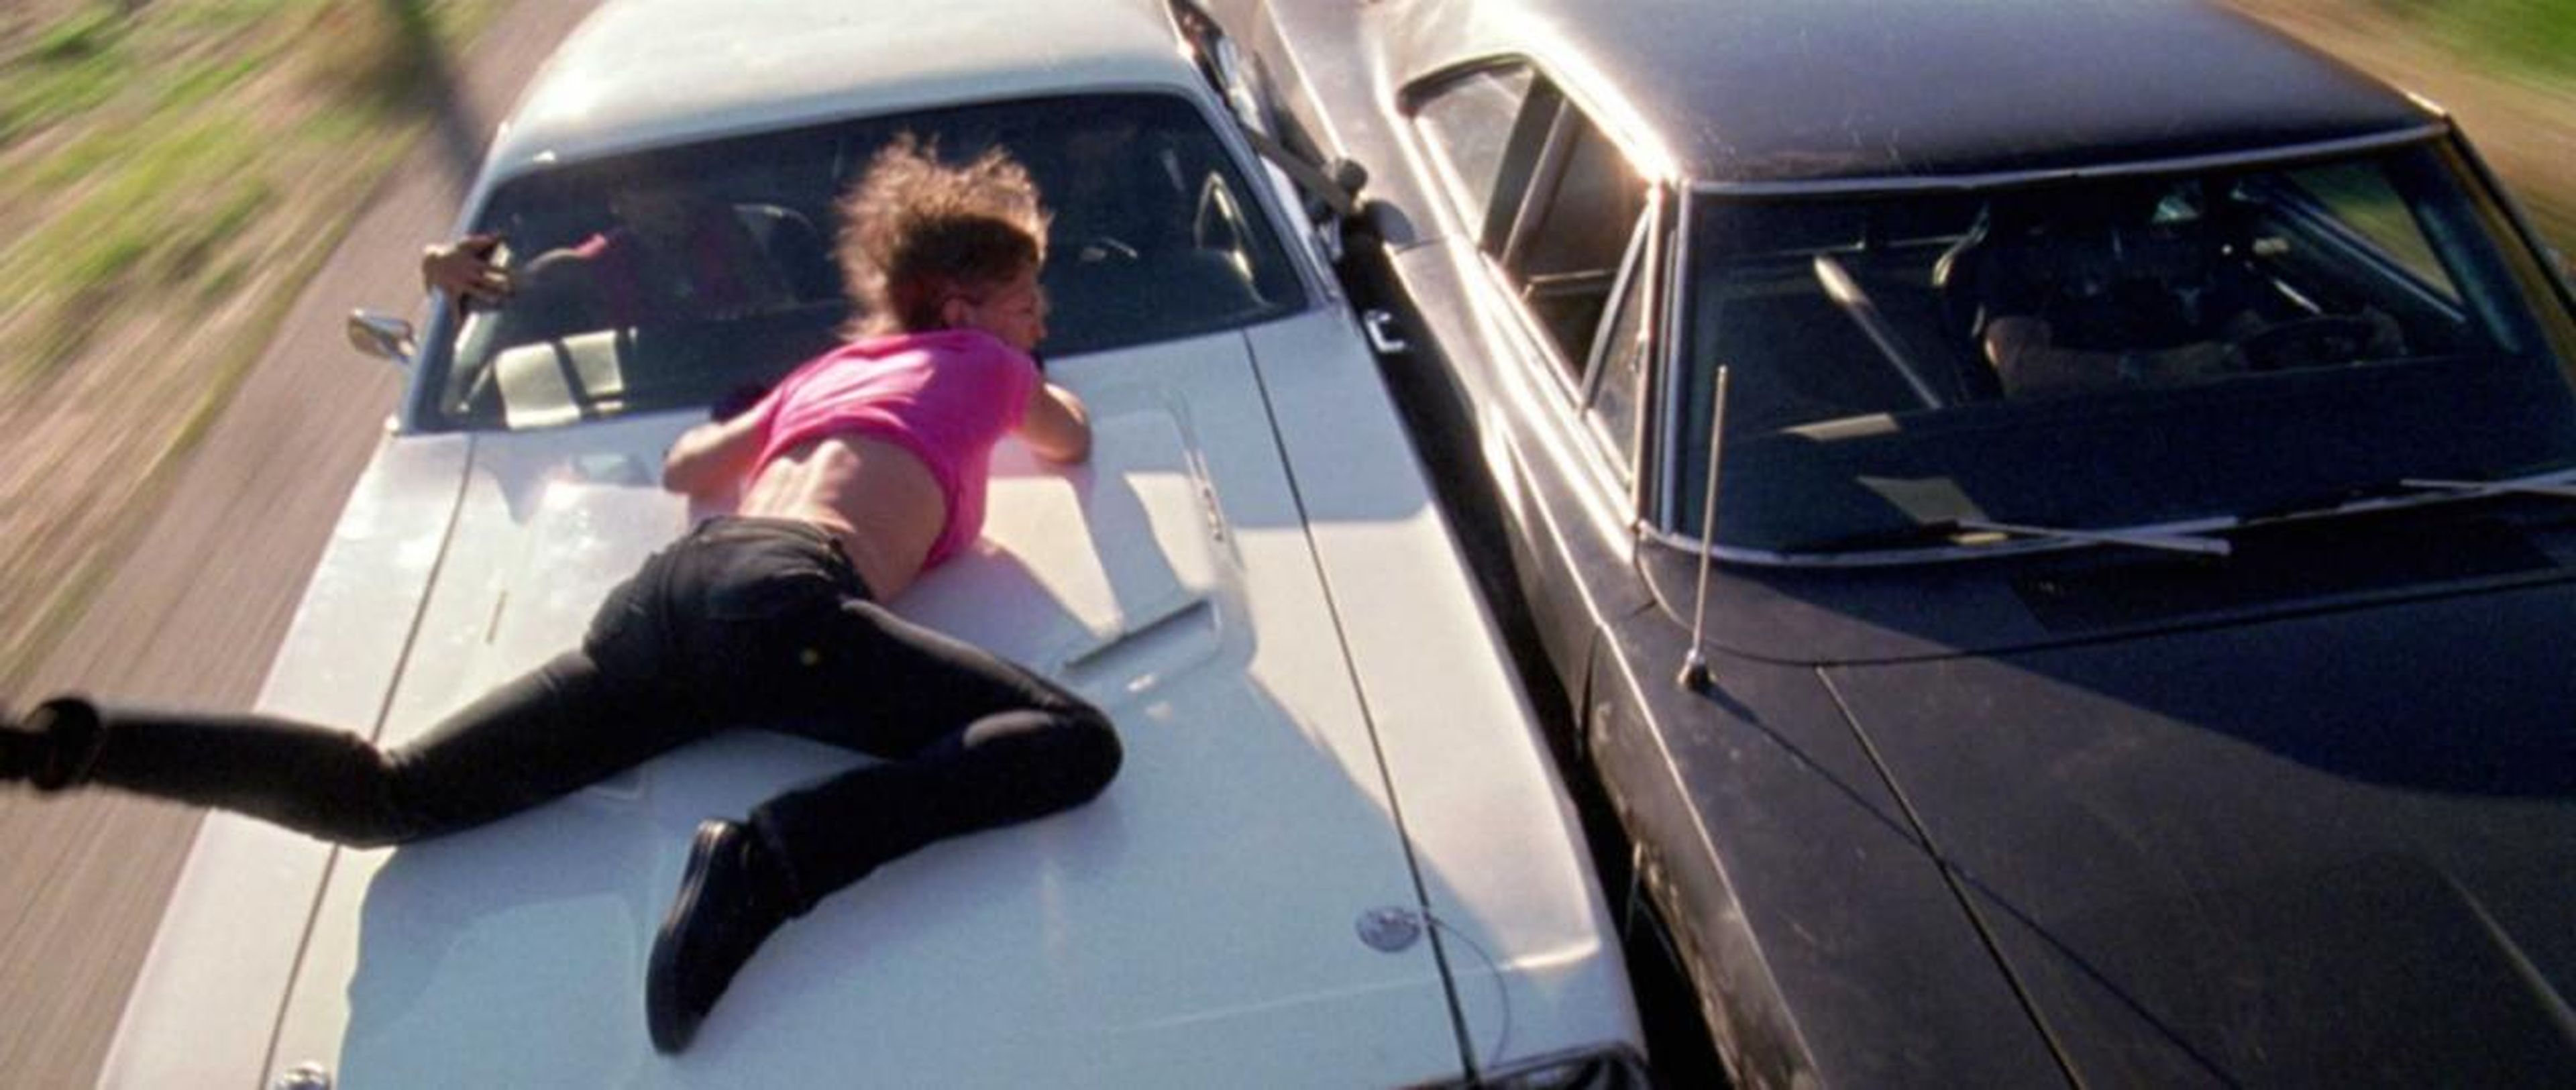 9. “Death Proof” (2007)